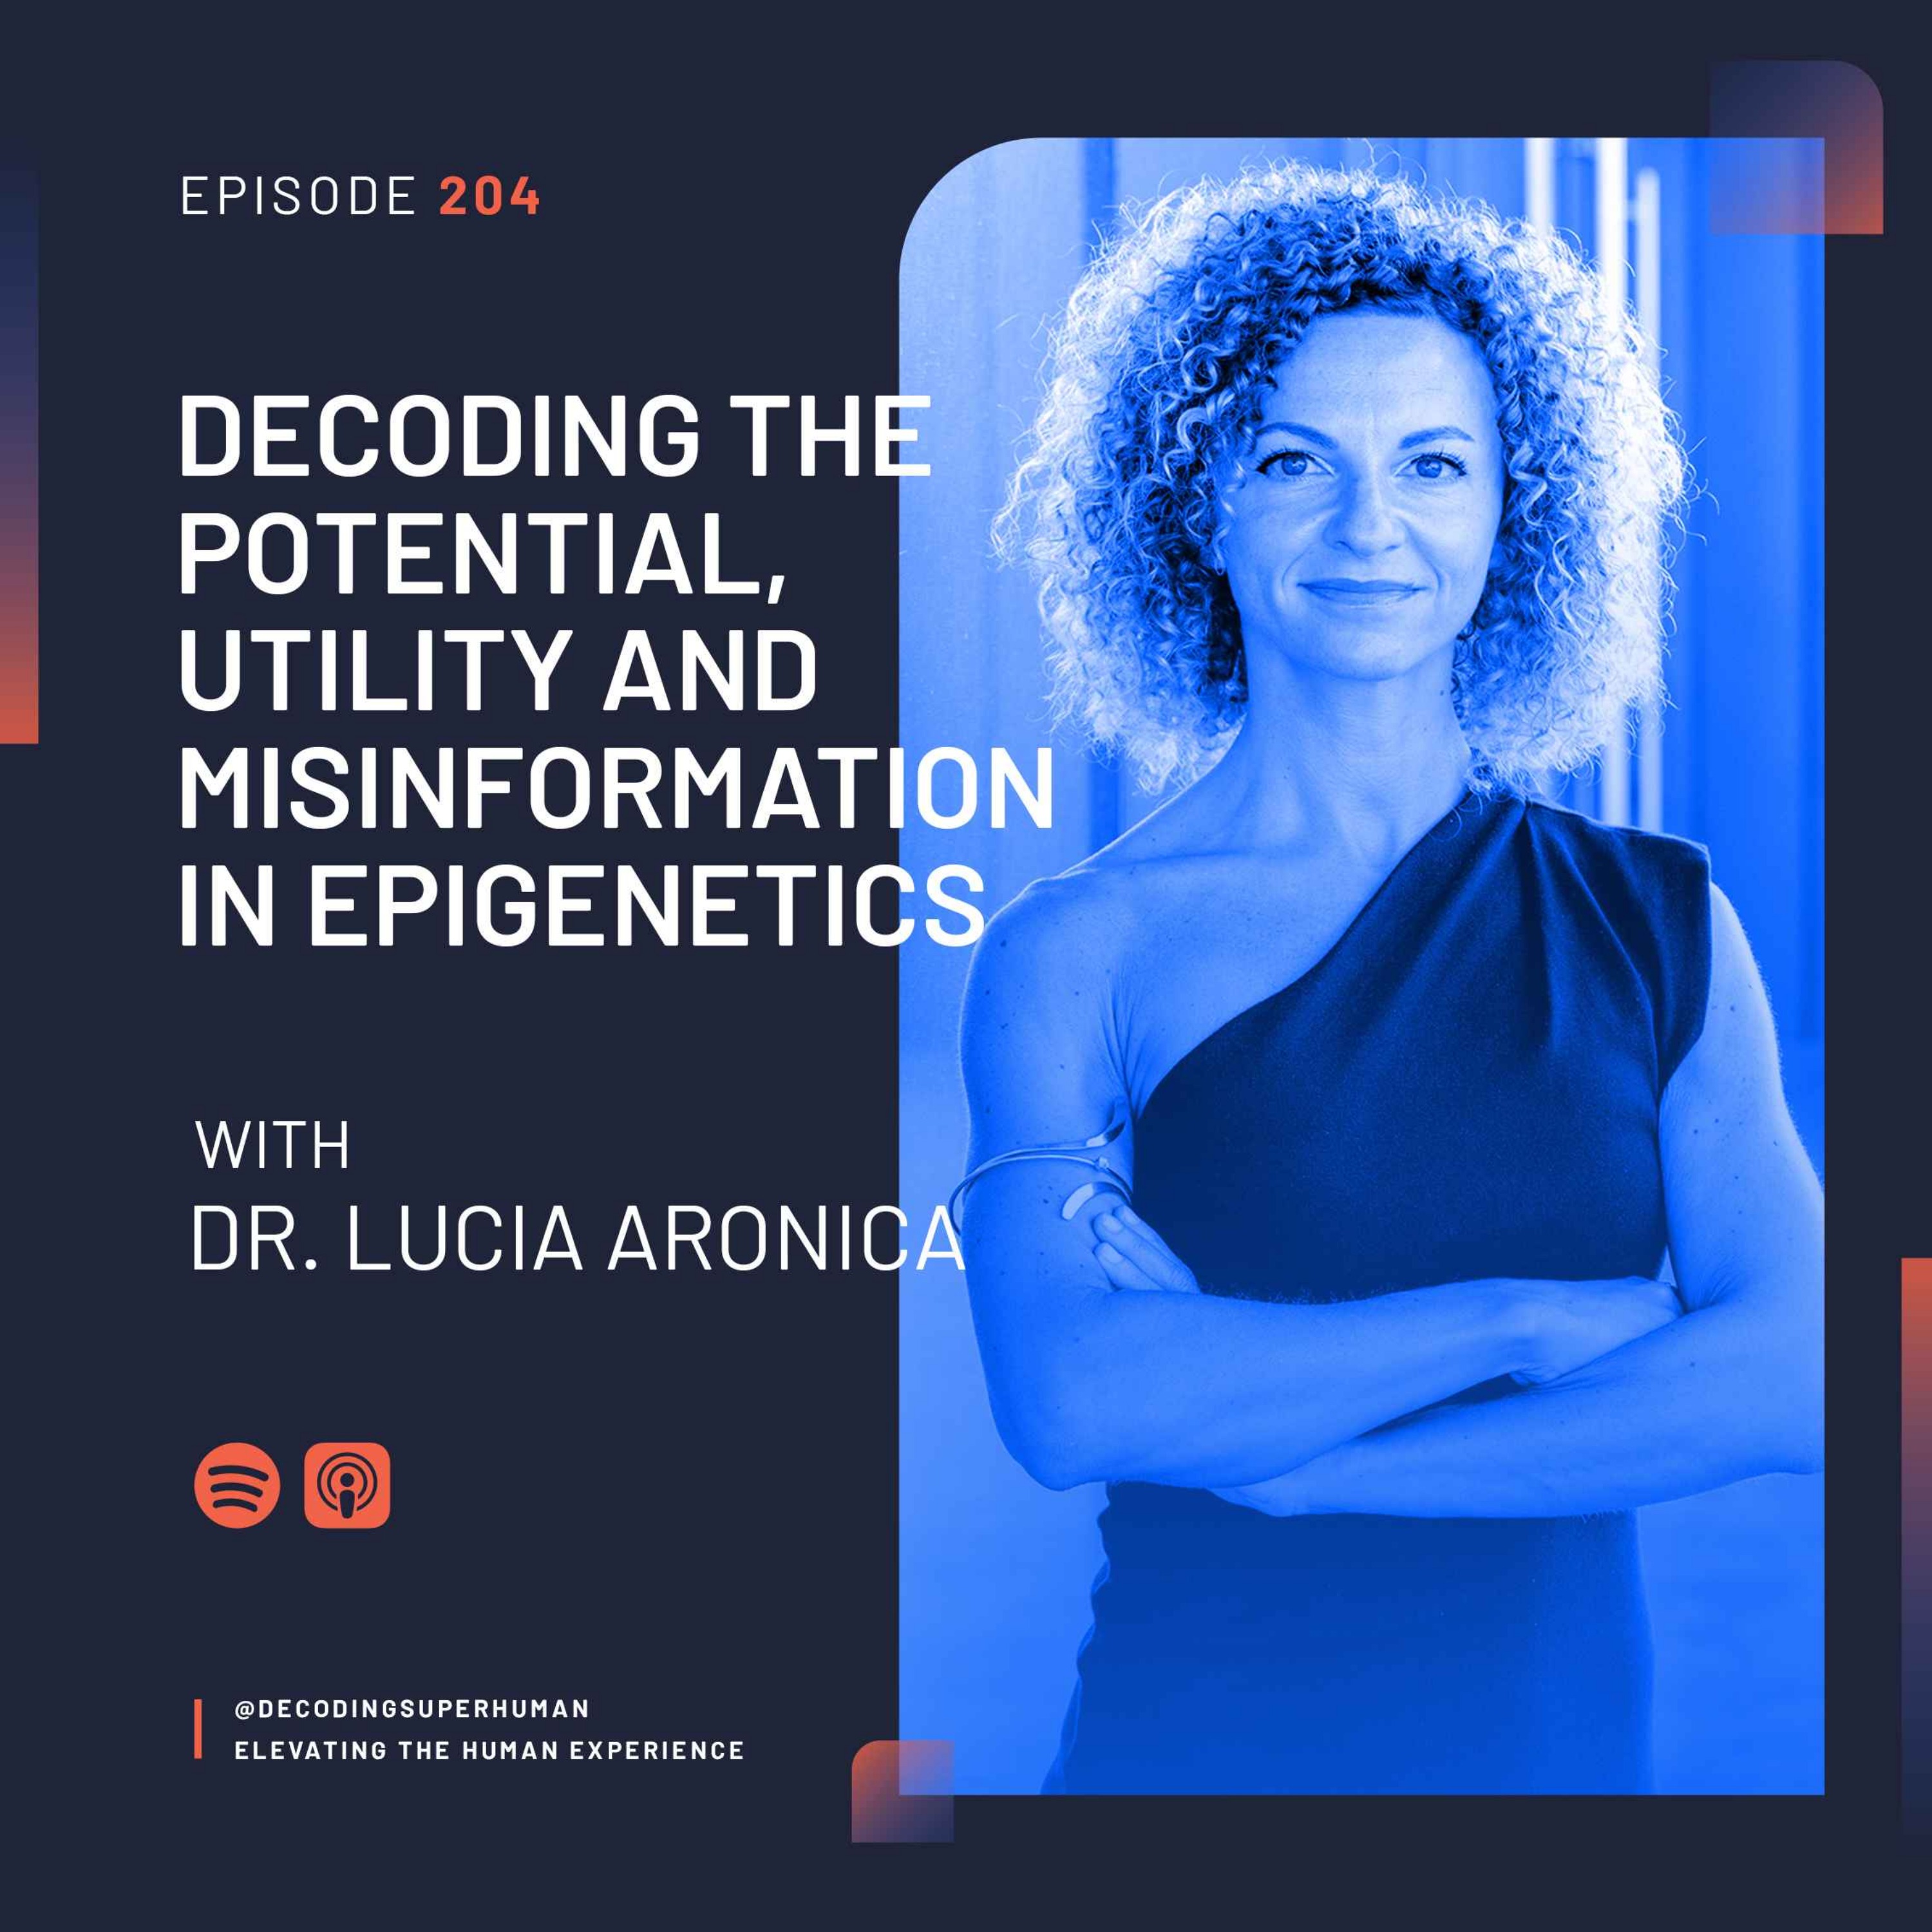 Decoding the Potential, Utility and Misinformation in Epigenetics with Dr. Lucia Aronica